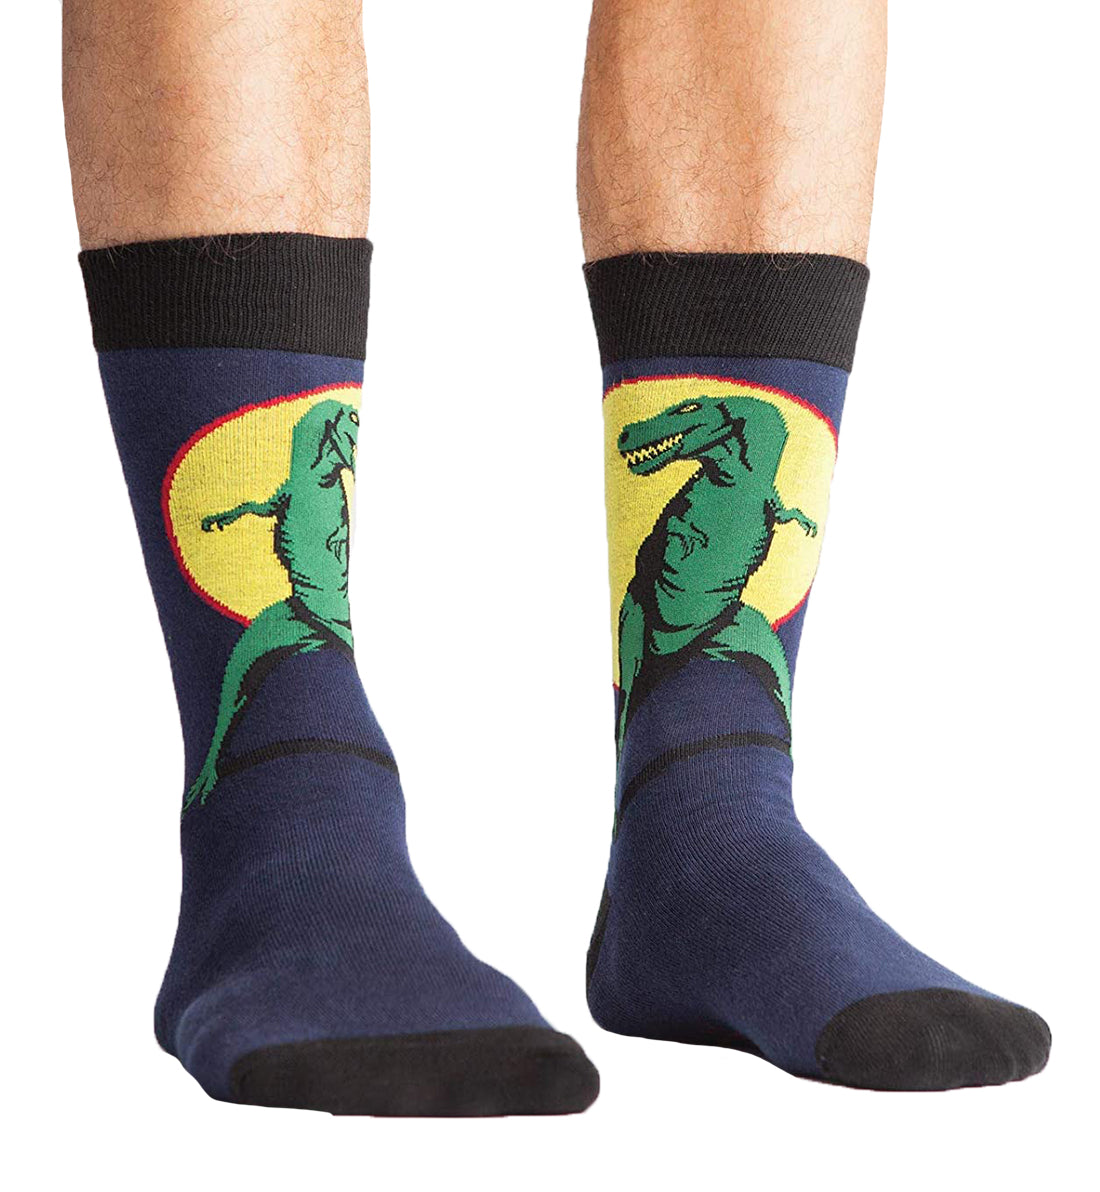 SOCK it to me Men&#39;s Crew Socks (mef0073),T-Rex - T-Rex,One Size